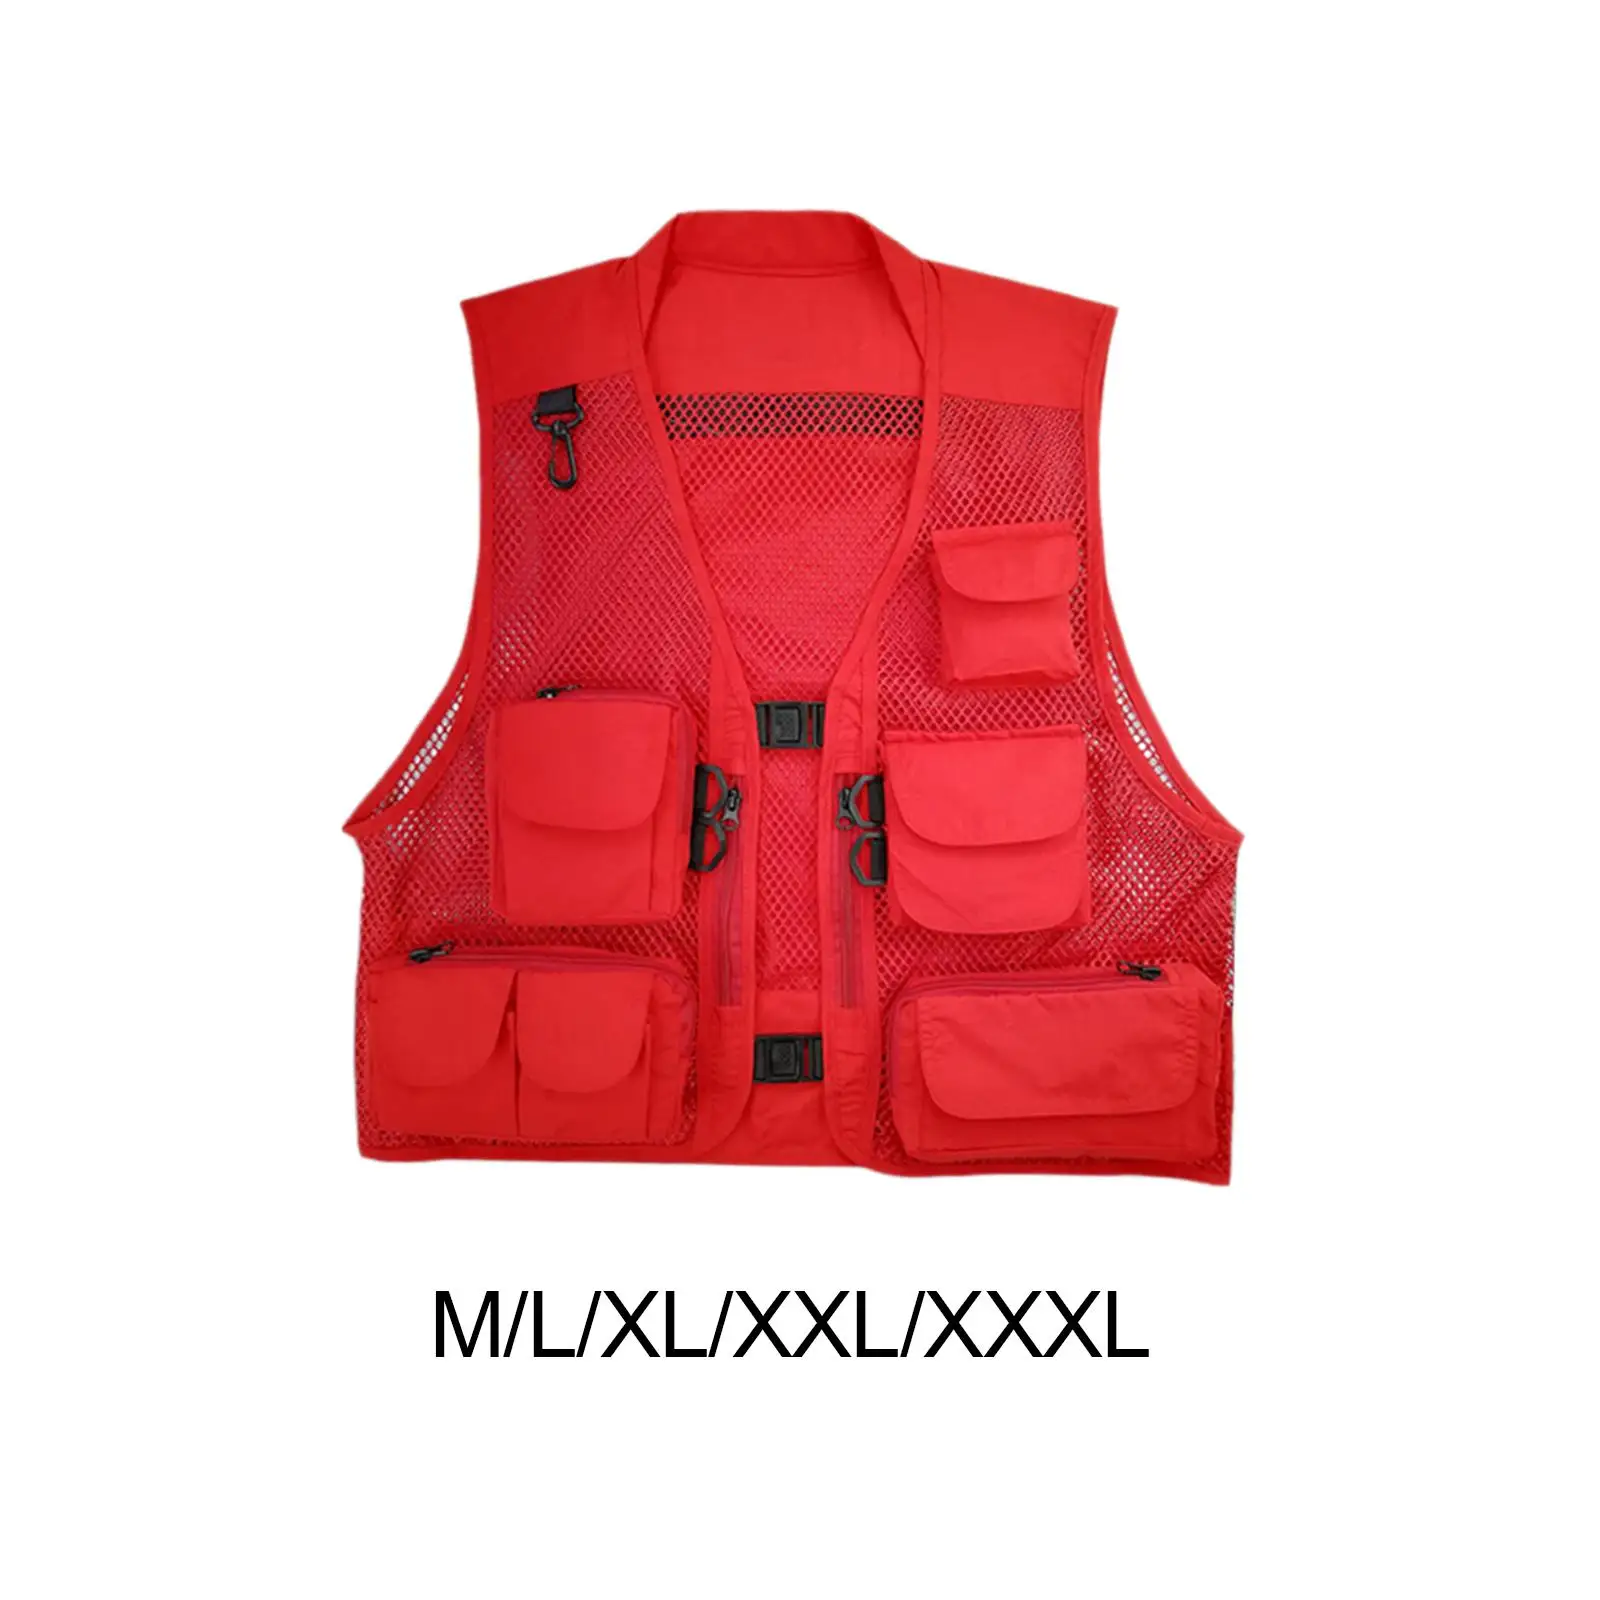 Men Mesh Fishing Photography Vest Multiple Pockets Red Durable for Sightseeing,Traveling Quick Drying Breathable Material Casual